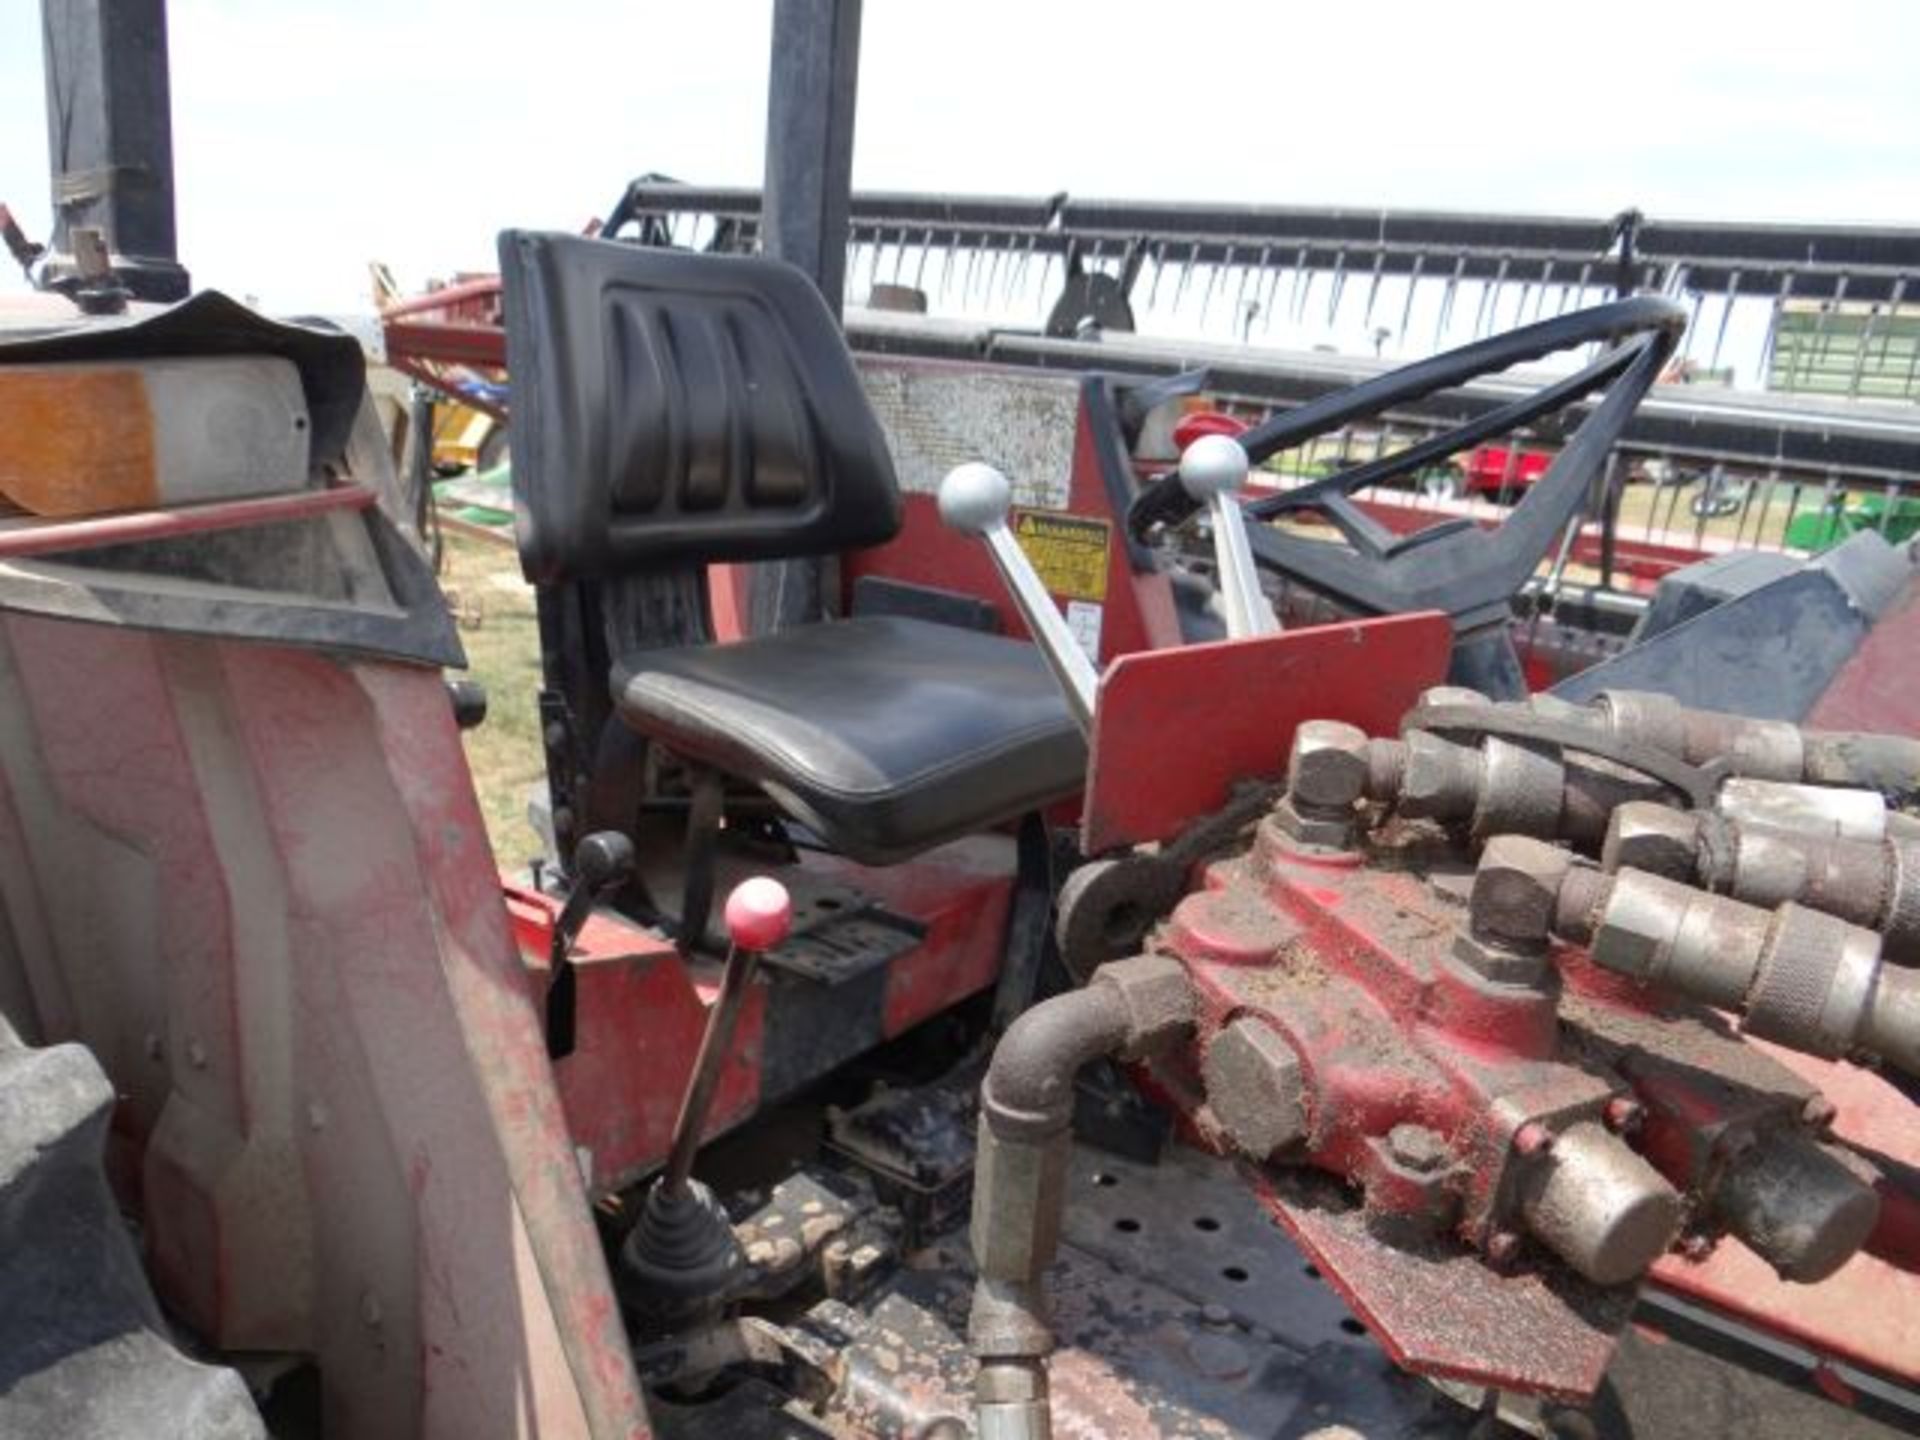 Case IH 1594 Tractor, 1988 w/Case IH 74L Loader, Bucket and Bale Spear, Manual in the Shed - Image 3 of 4